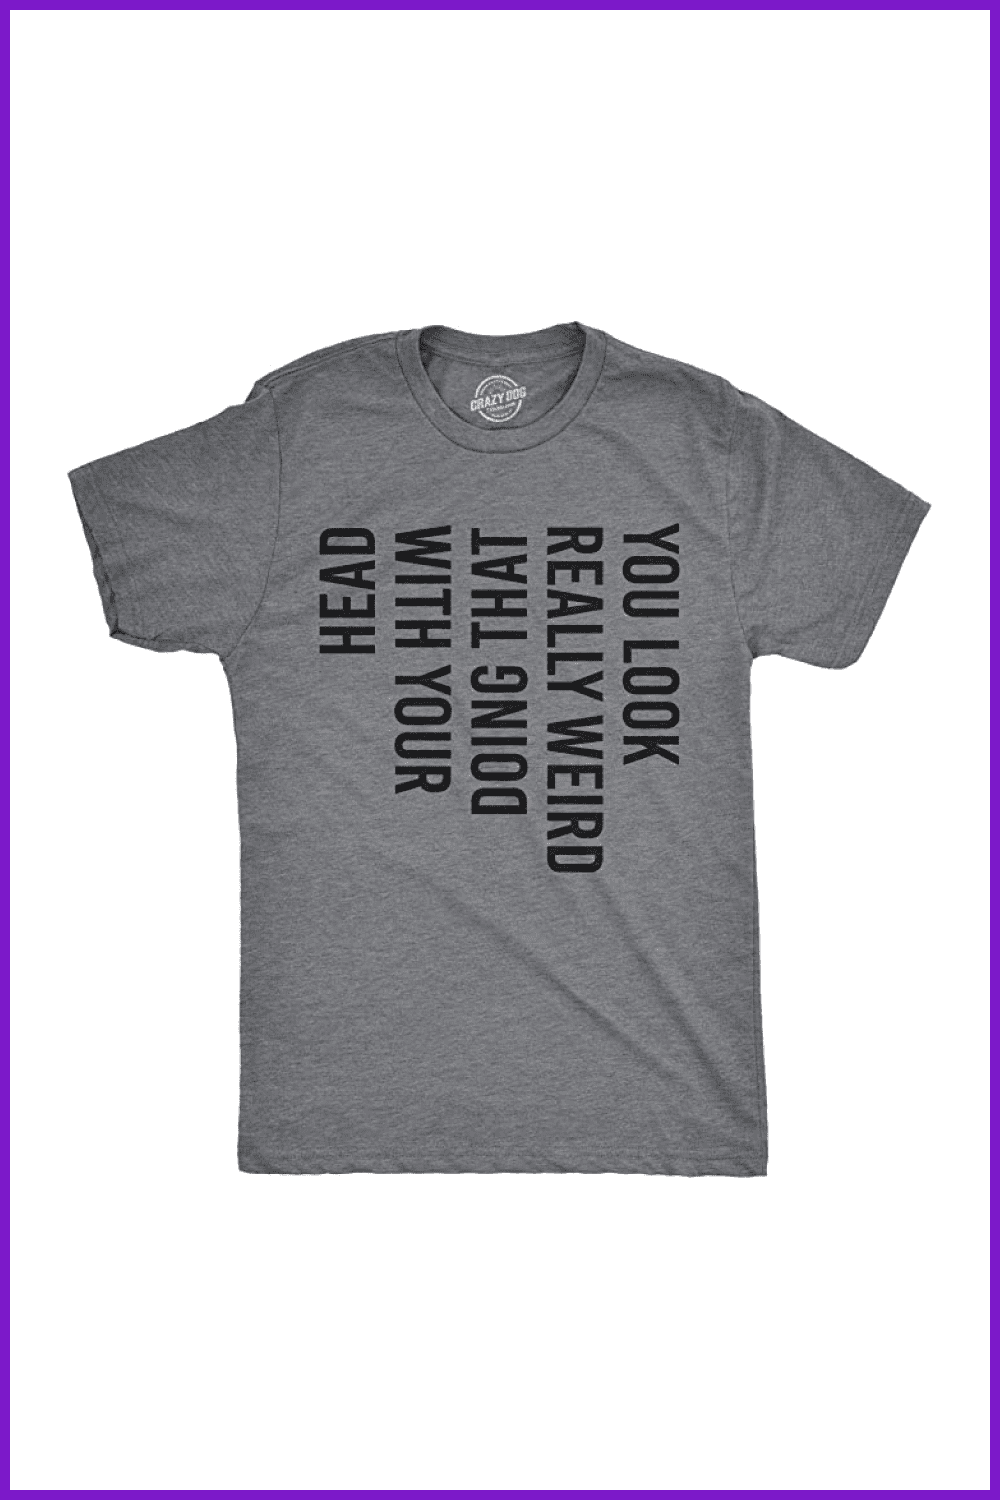 Grey T-Shirt with funny black text.